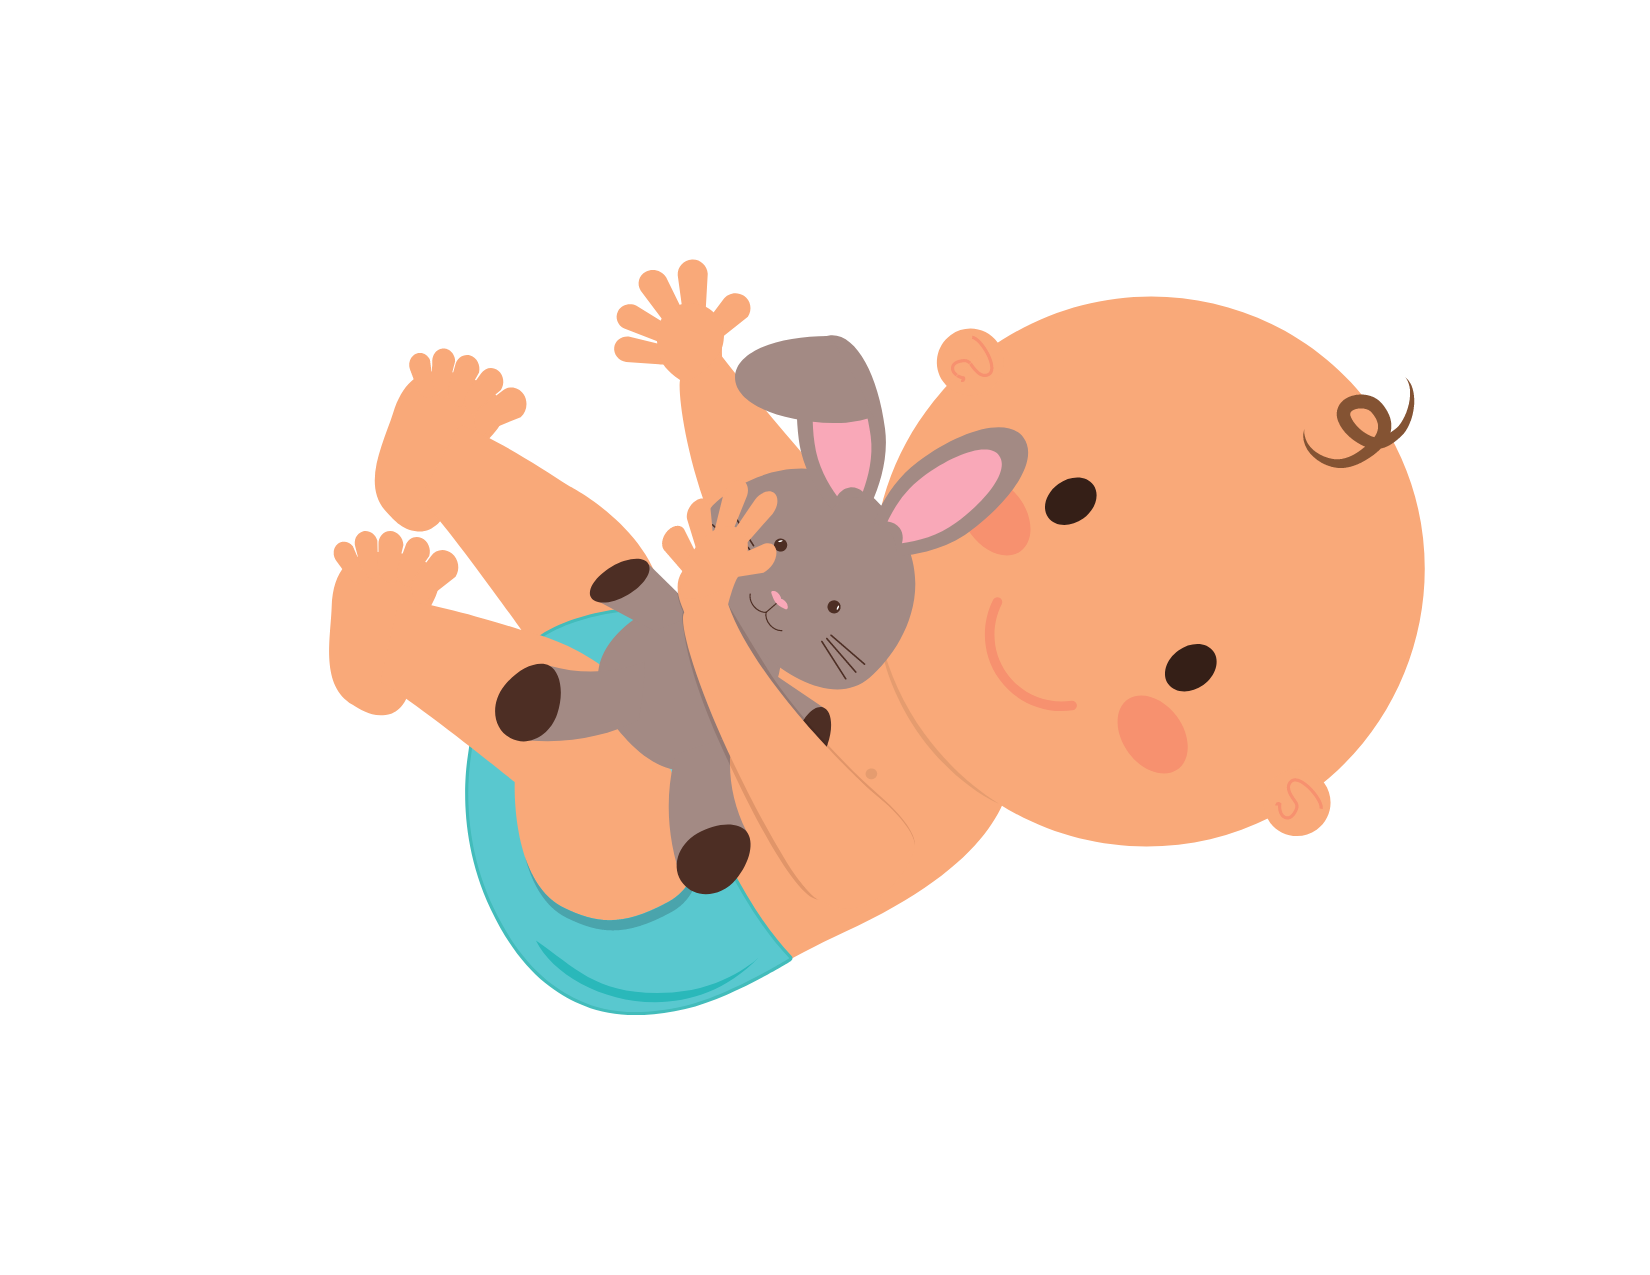 illustrated image of a happy baby lying on its back holding a stuffed bunny